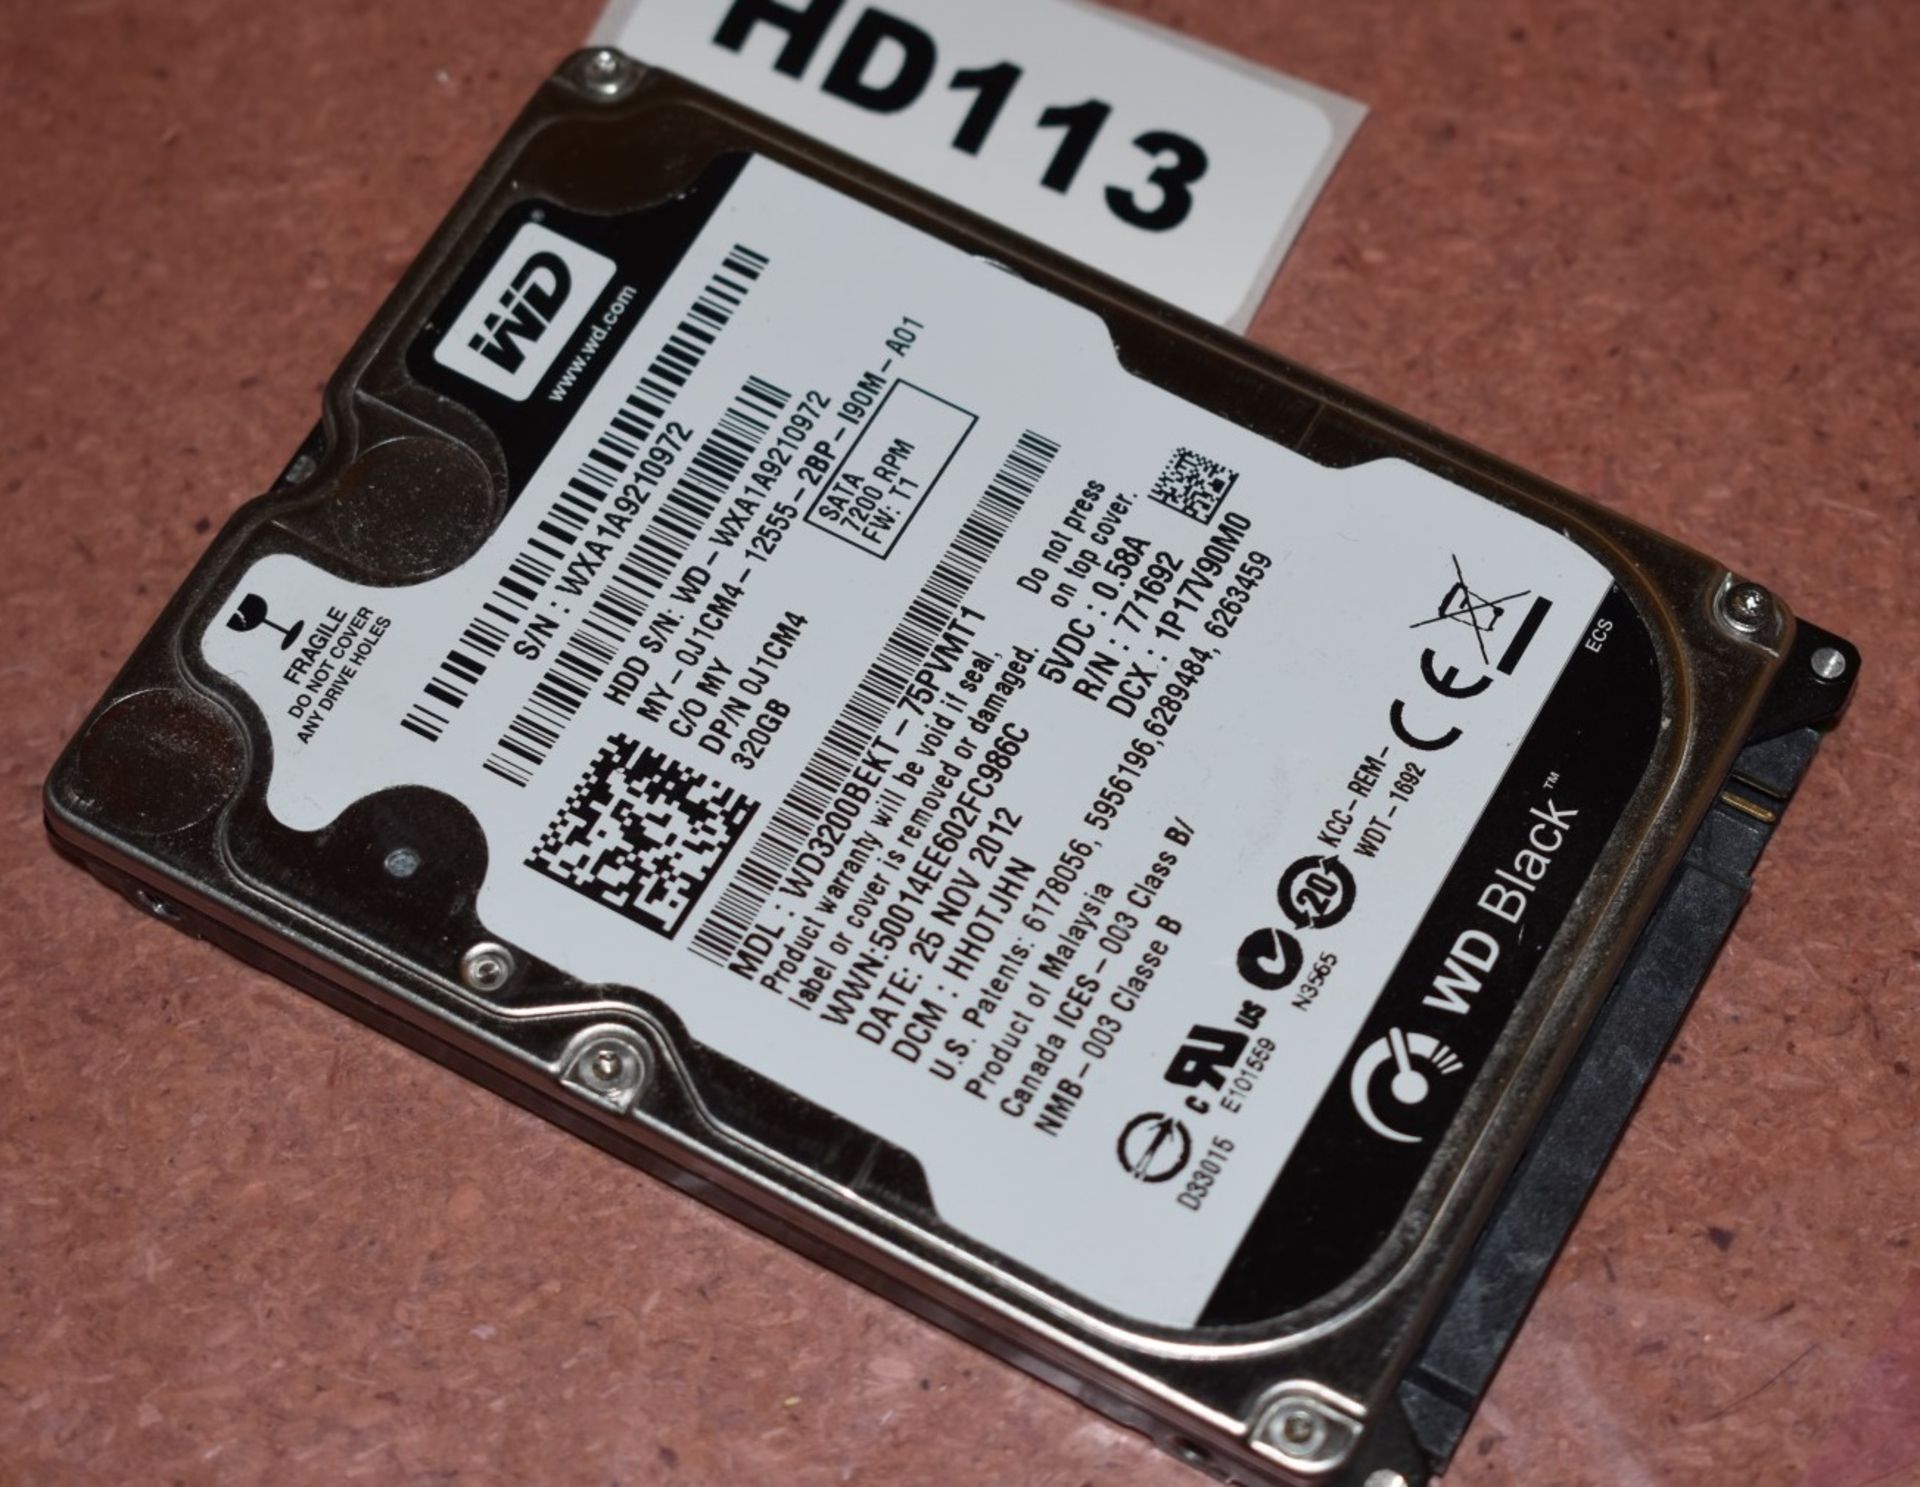 4 x Western Digital 320gb Black 2.5 Inch SATA Hard Drives - Tested and Formatted - HD113/114/118/124